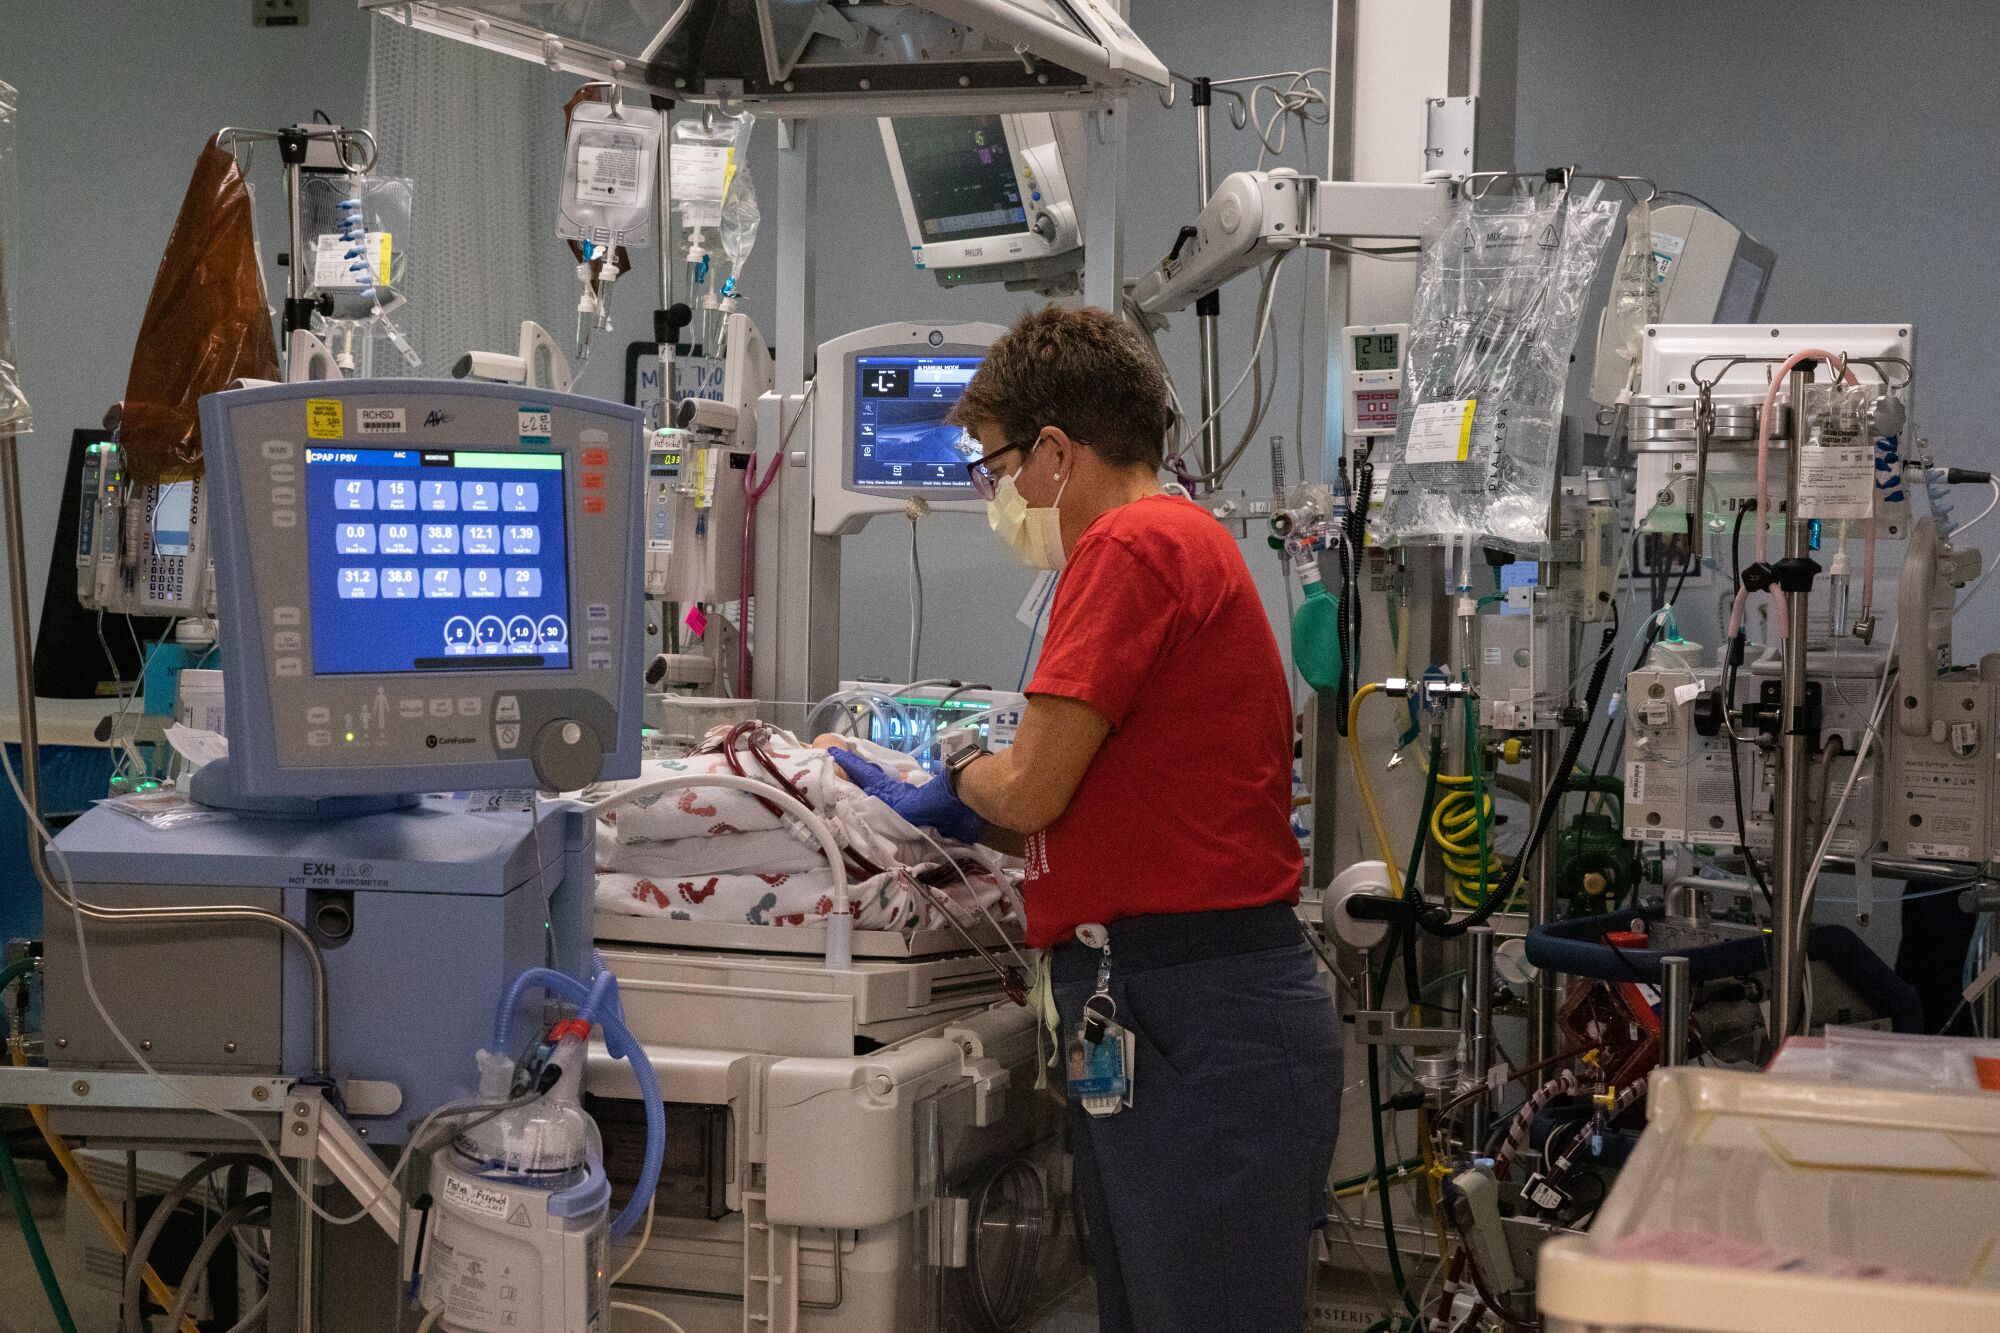 RN Lisa Hayes prepares a premature baby for a blood transfusion in the NICU department of Rady Children's Hospital.